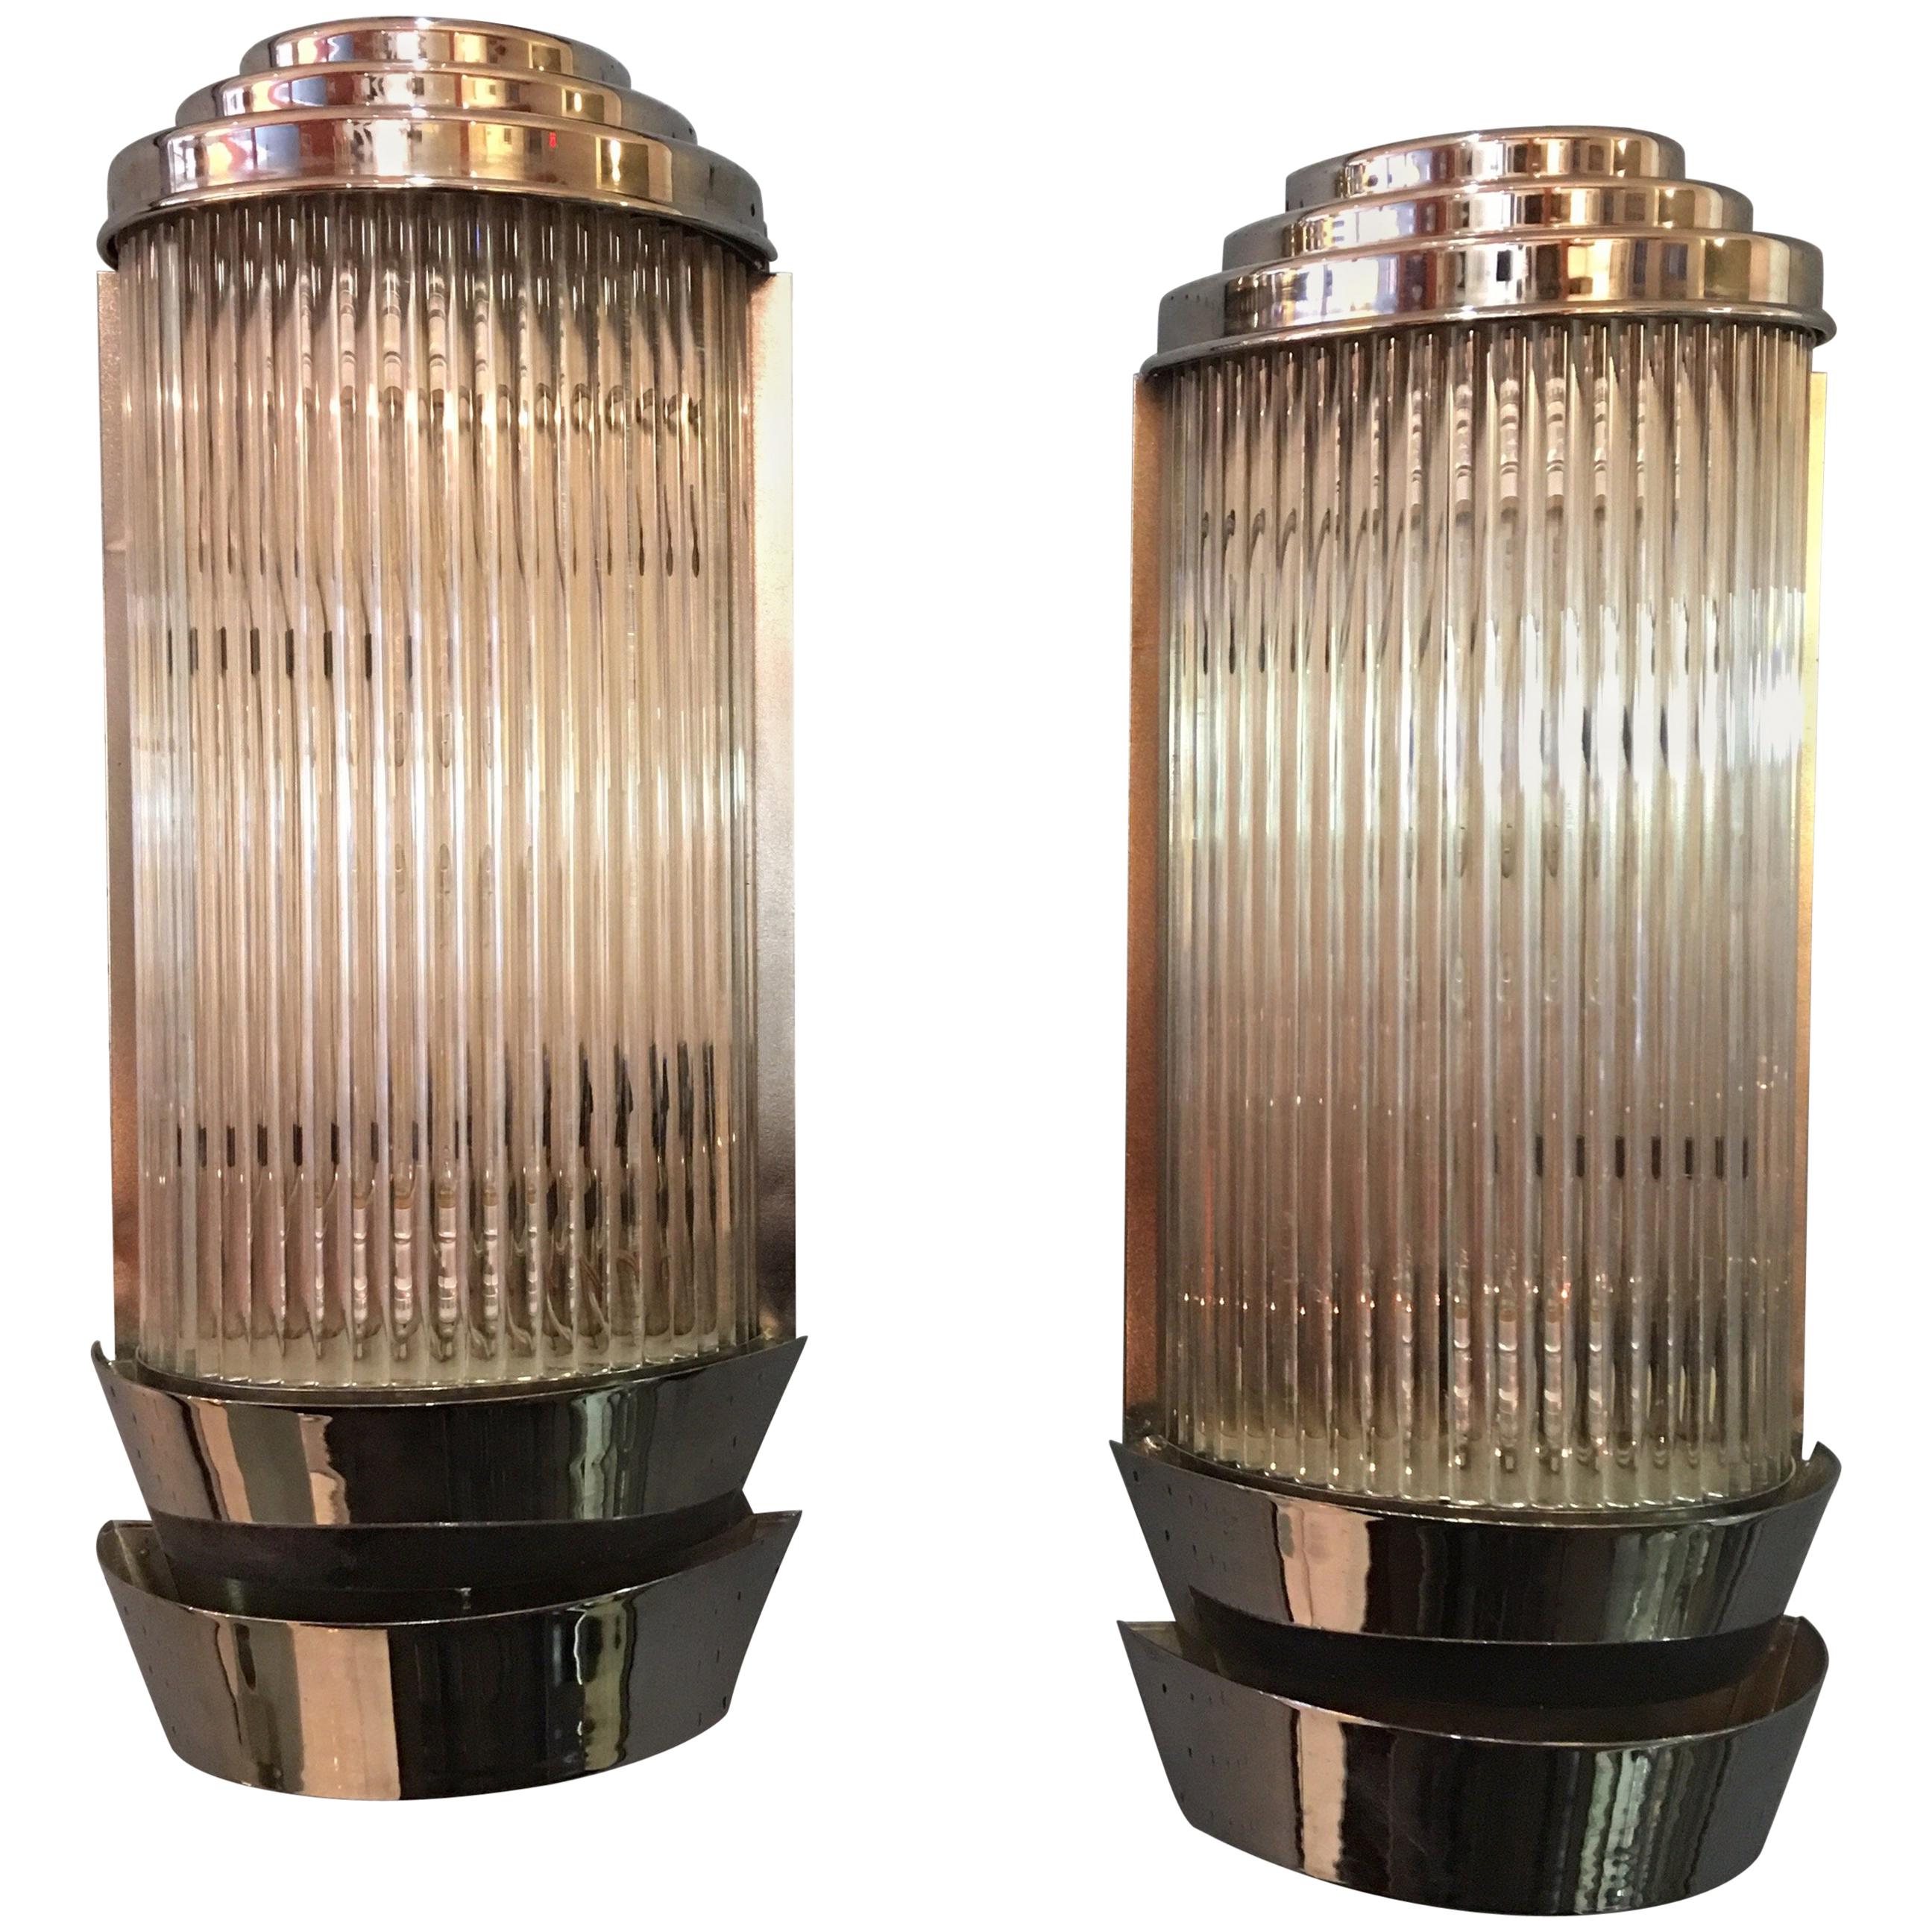 Large Nickel-Plated Deco Sconces with Glass Rods